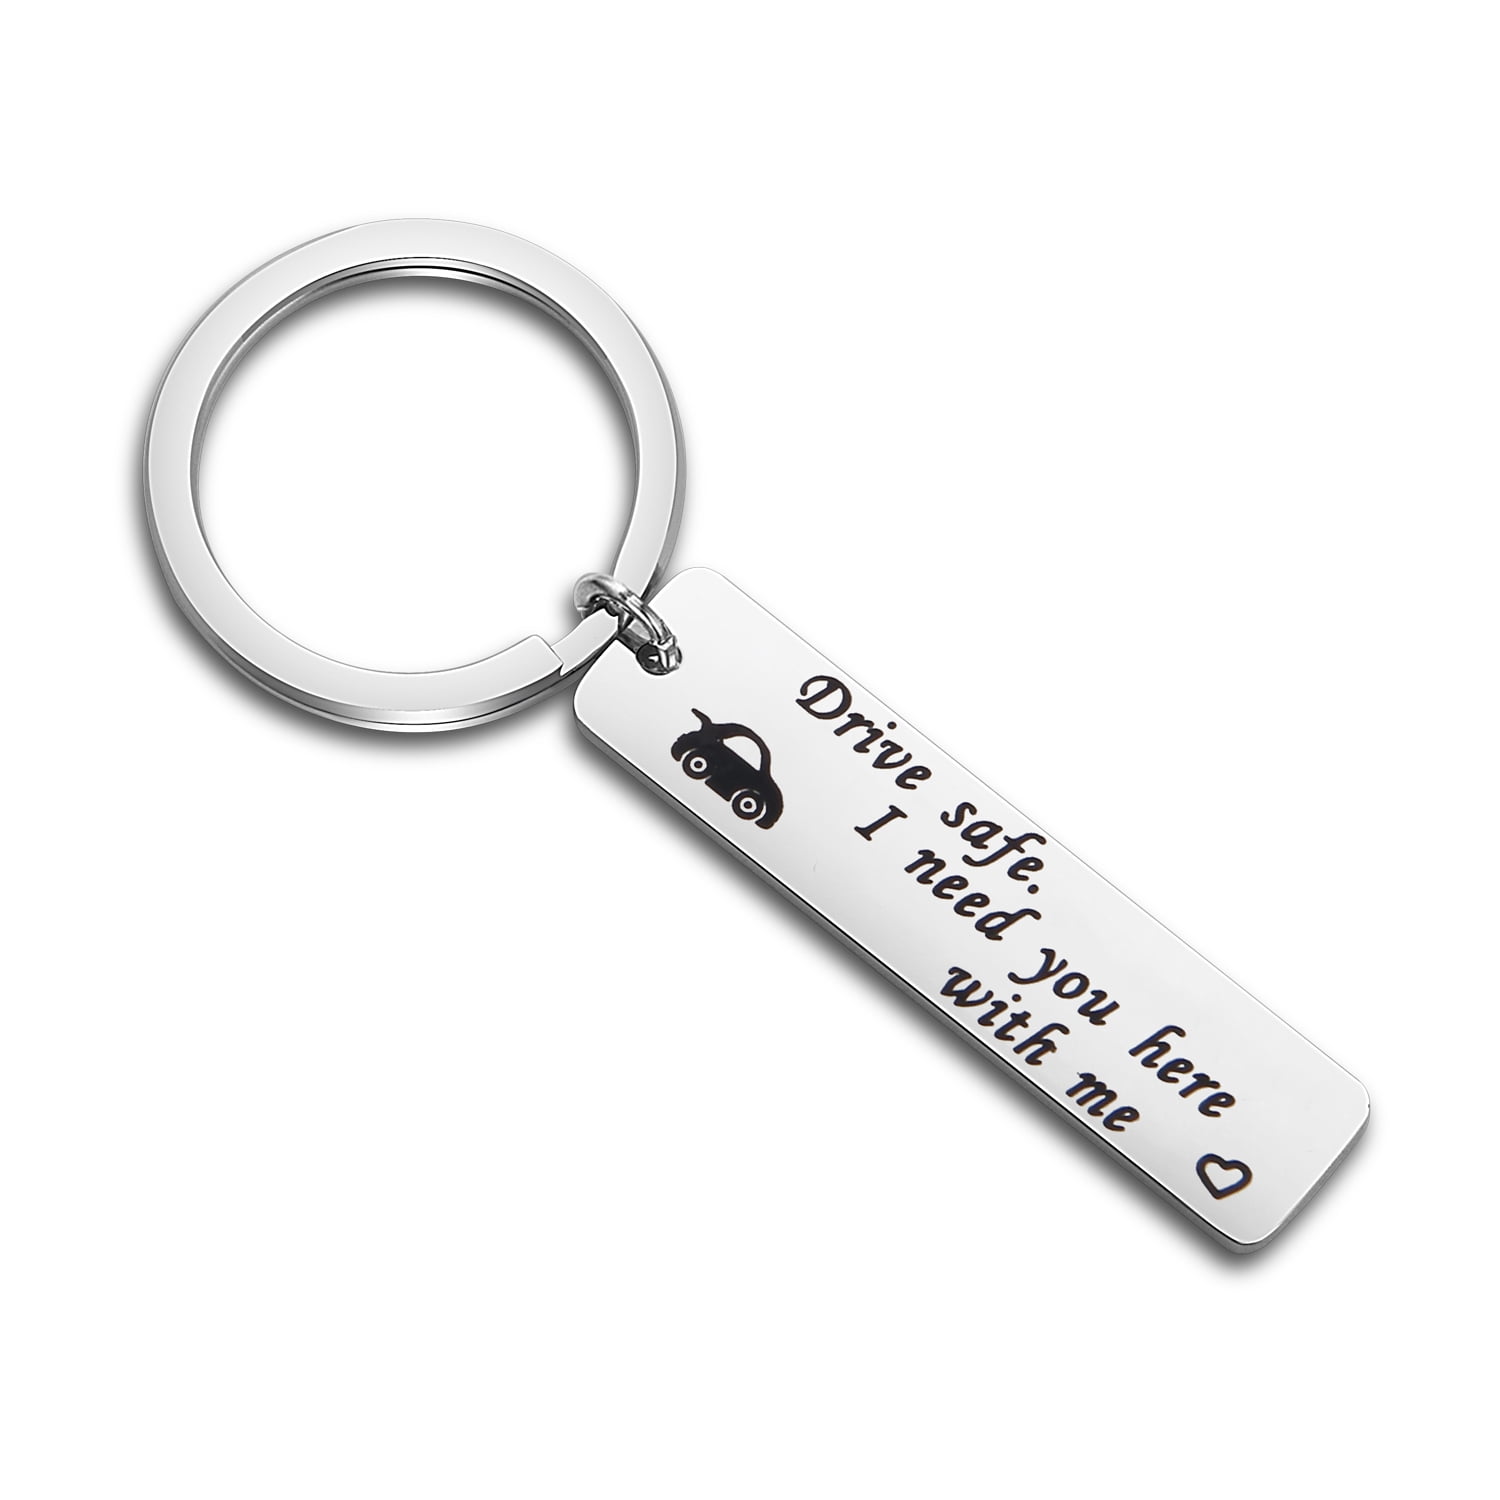 Drive safely I need you here with me engraved keychain charm car key ring. 